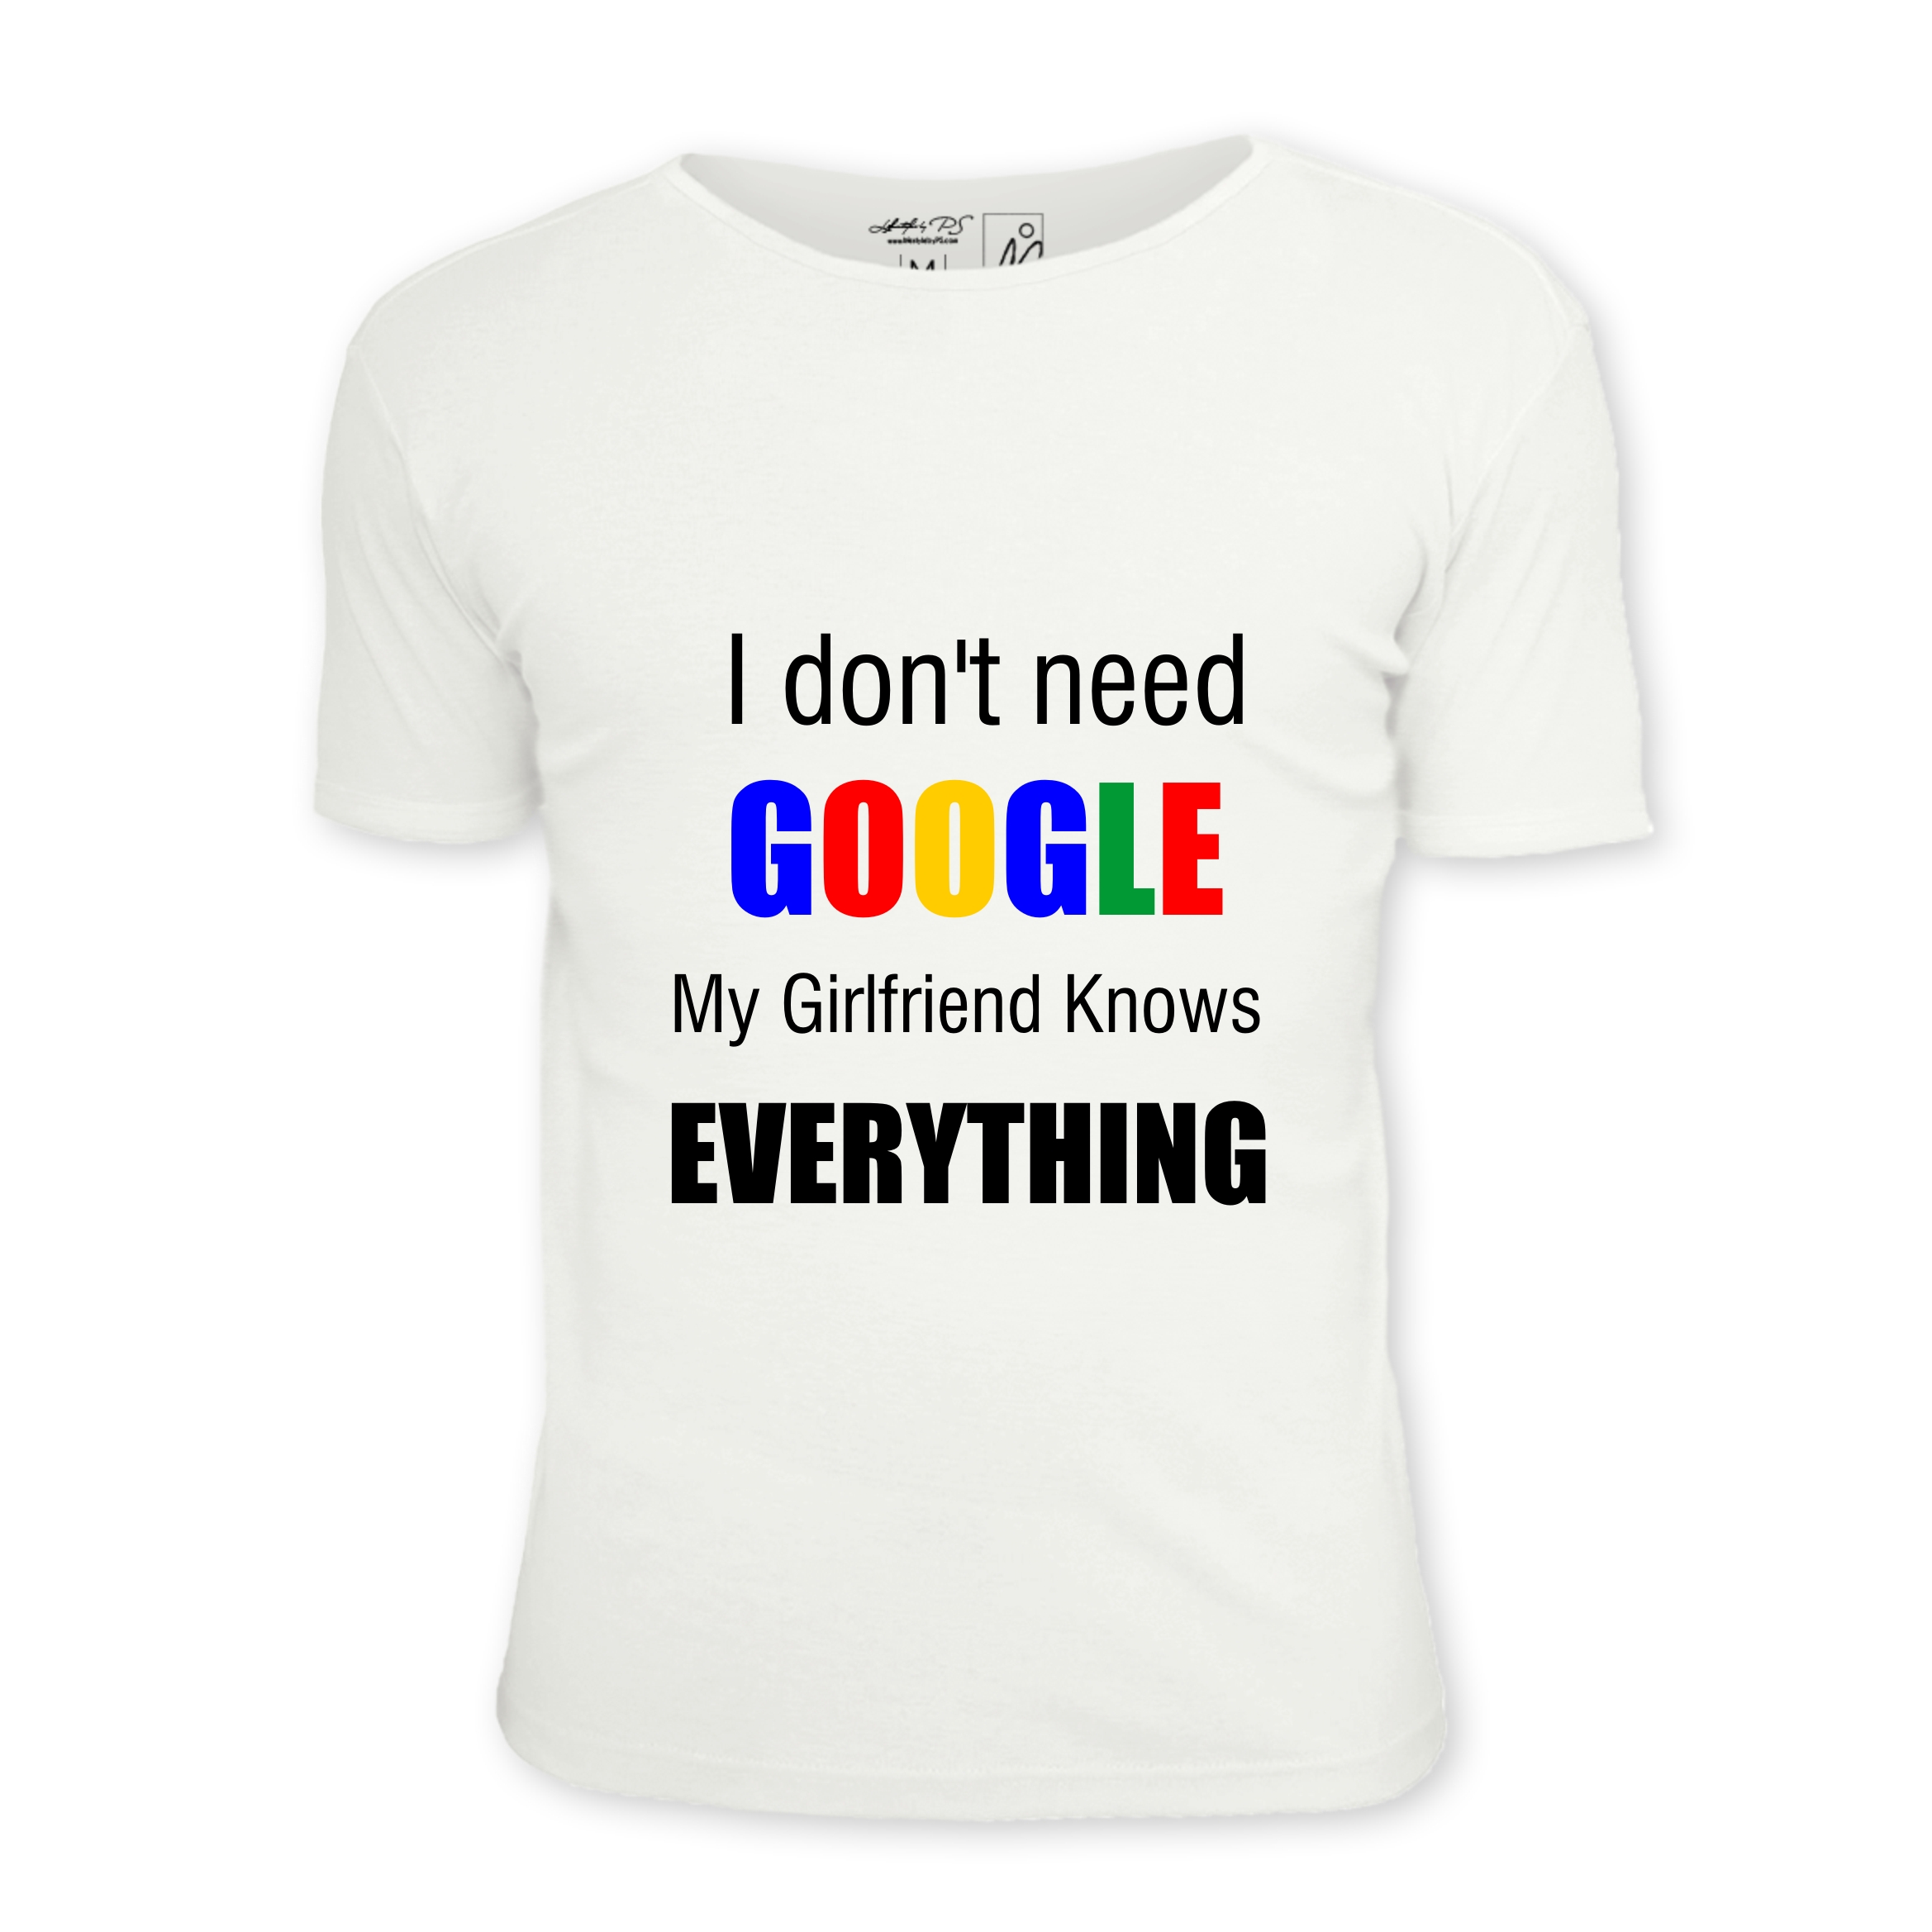 Buy Google T-Shirt Online @ ₹299 from ShopClues